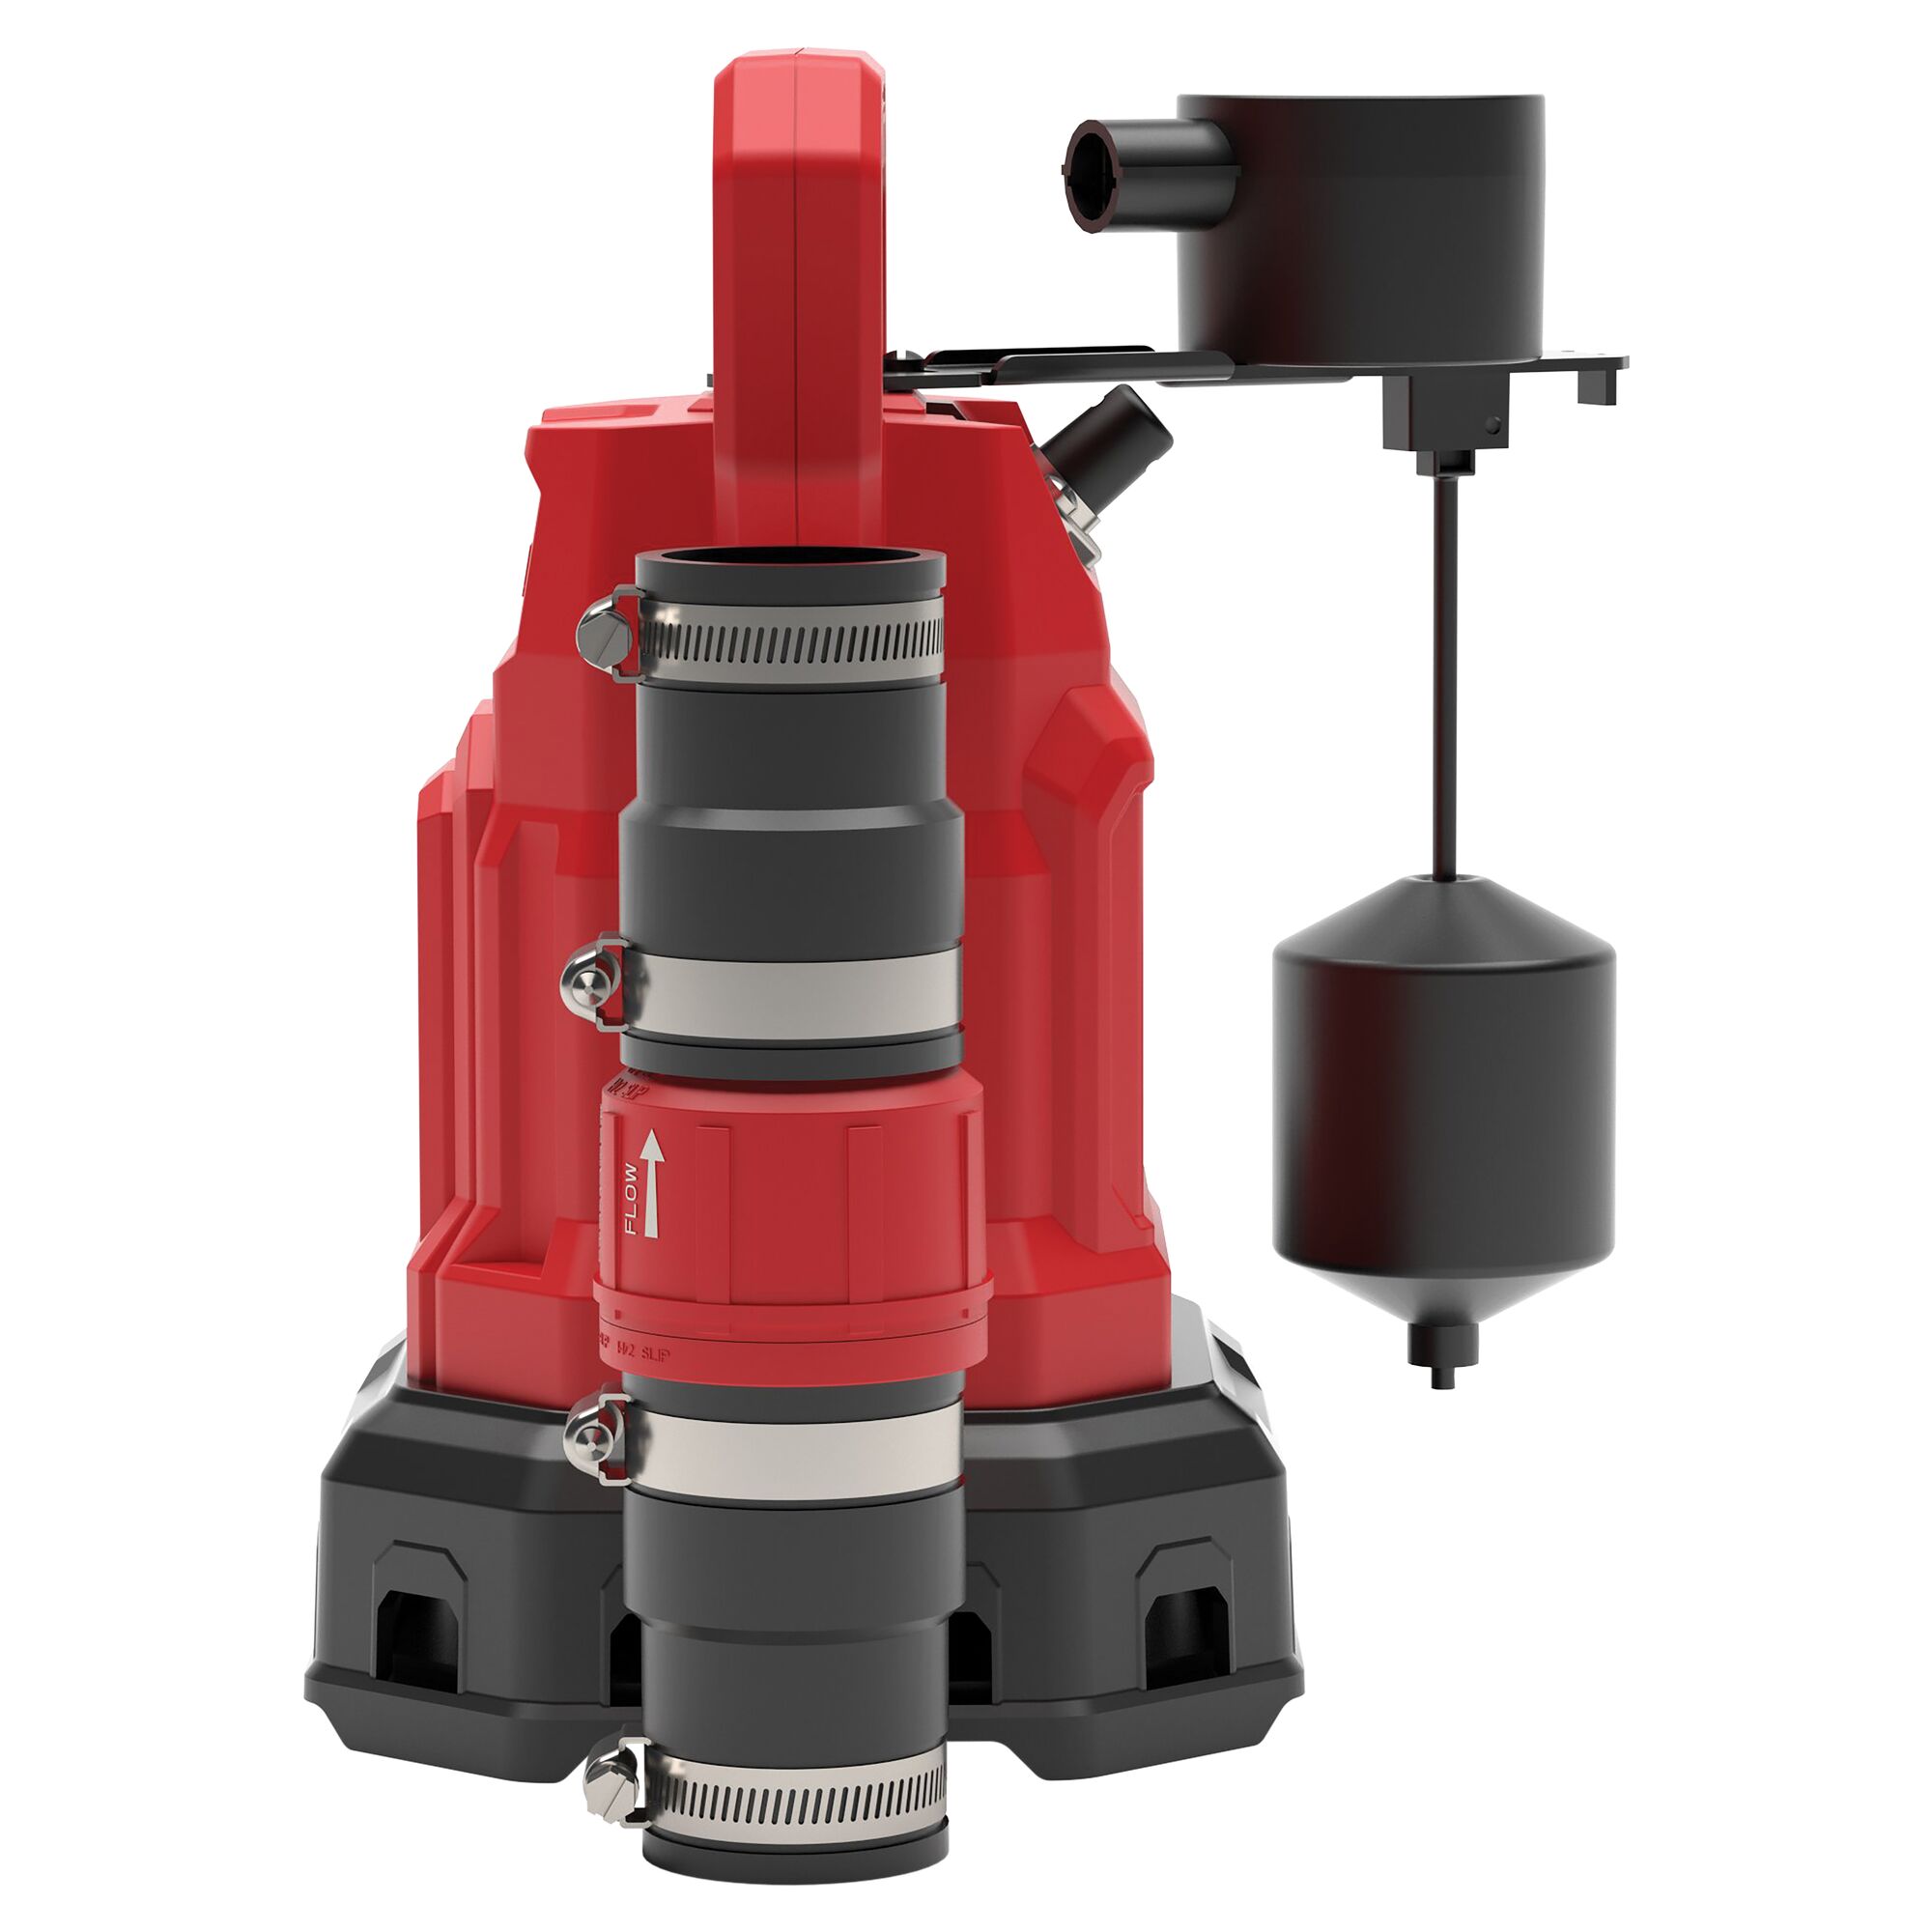 1-3HP SUMP PUMP REINFORCED THERMOPLASTIC SUBMERSIBLE AUTOMATIC VERTICAL SWITCH INCLUDES CHECK VALVE RIGHT VIEW